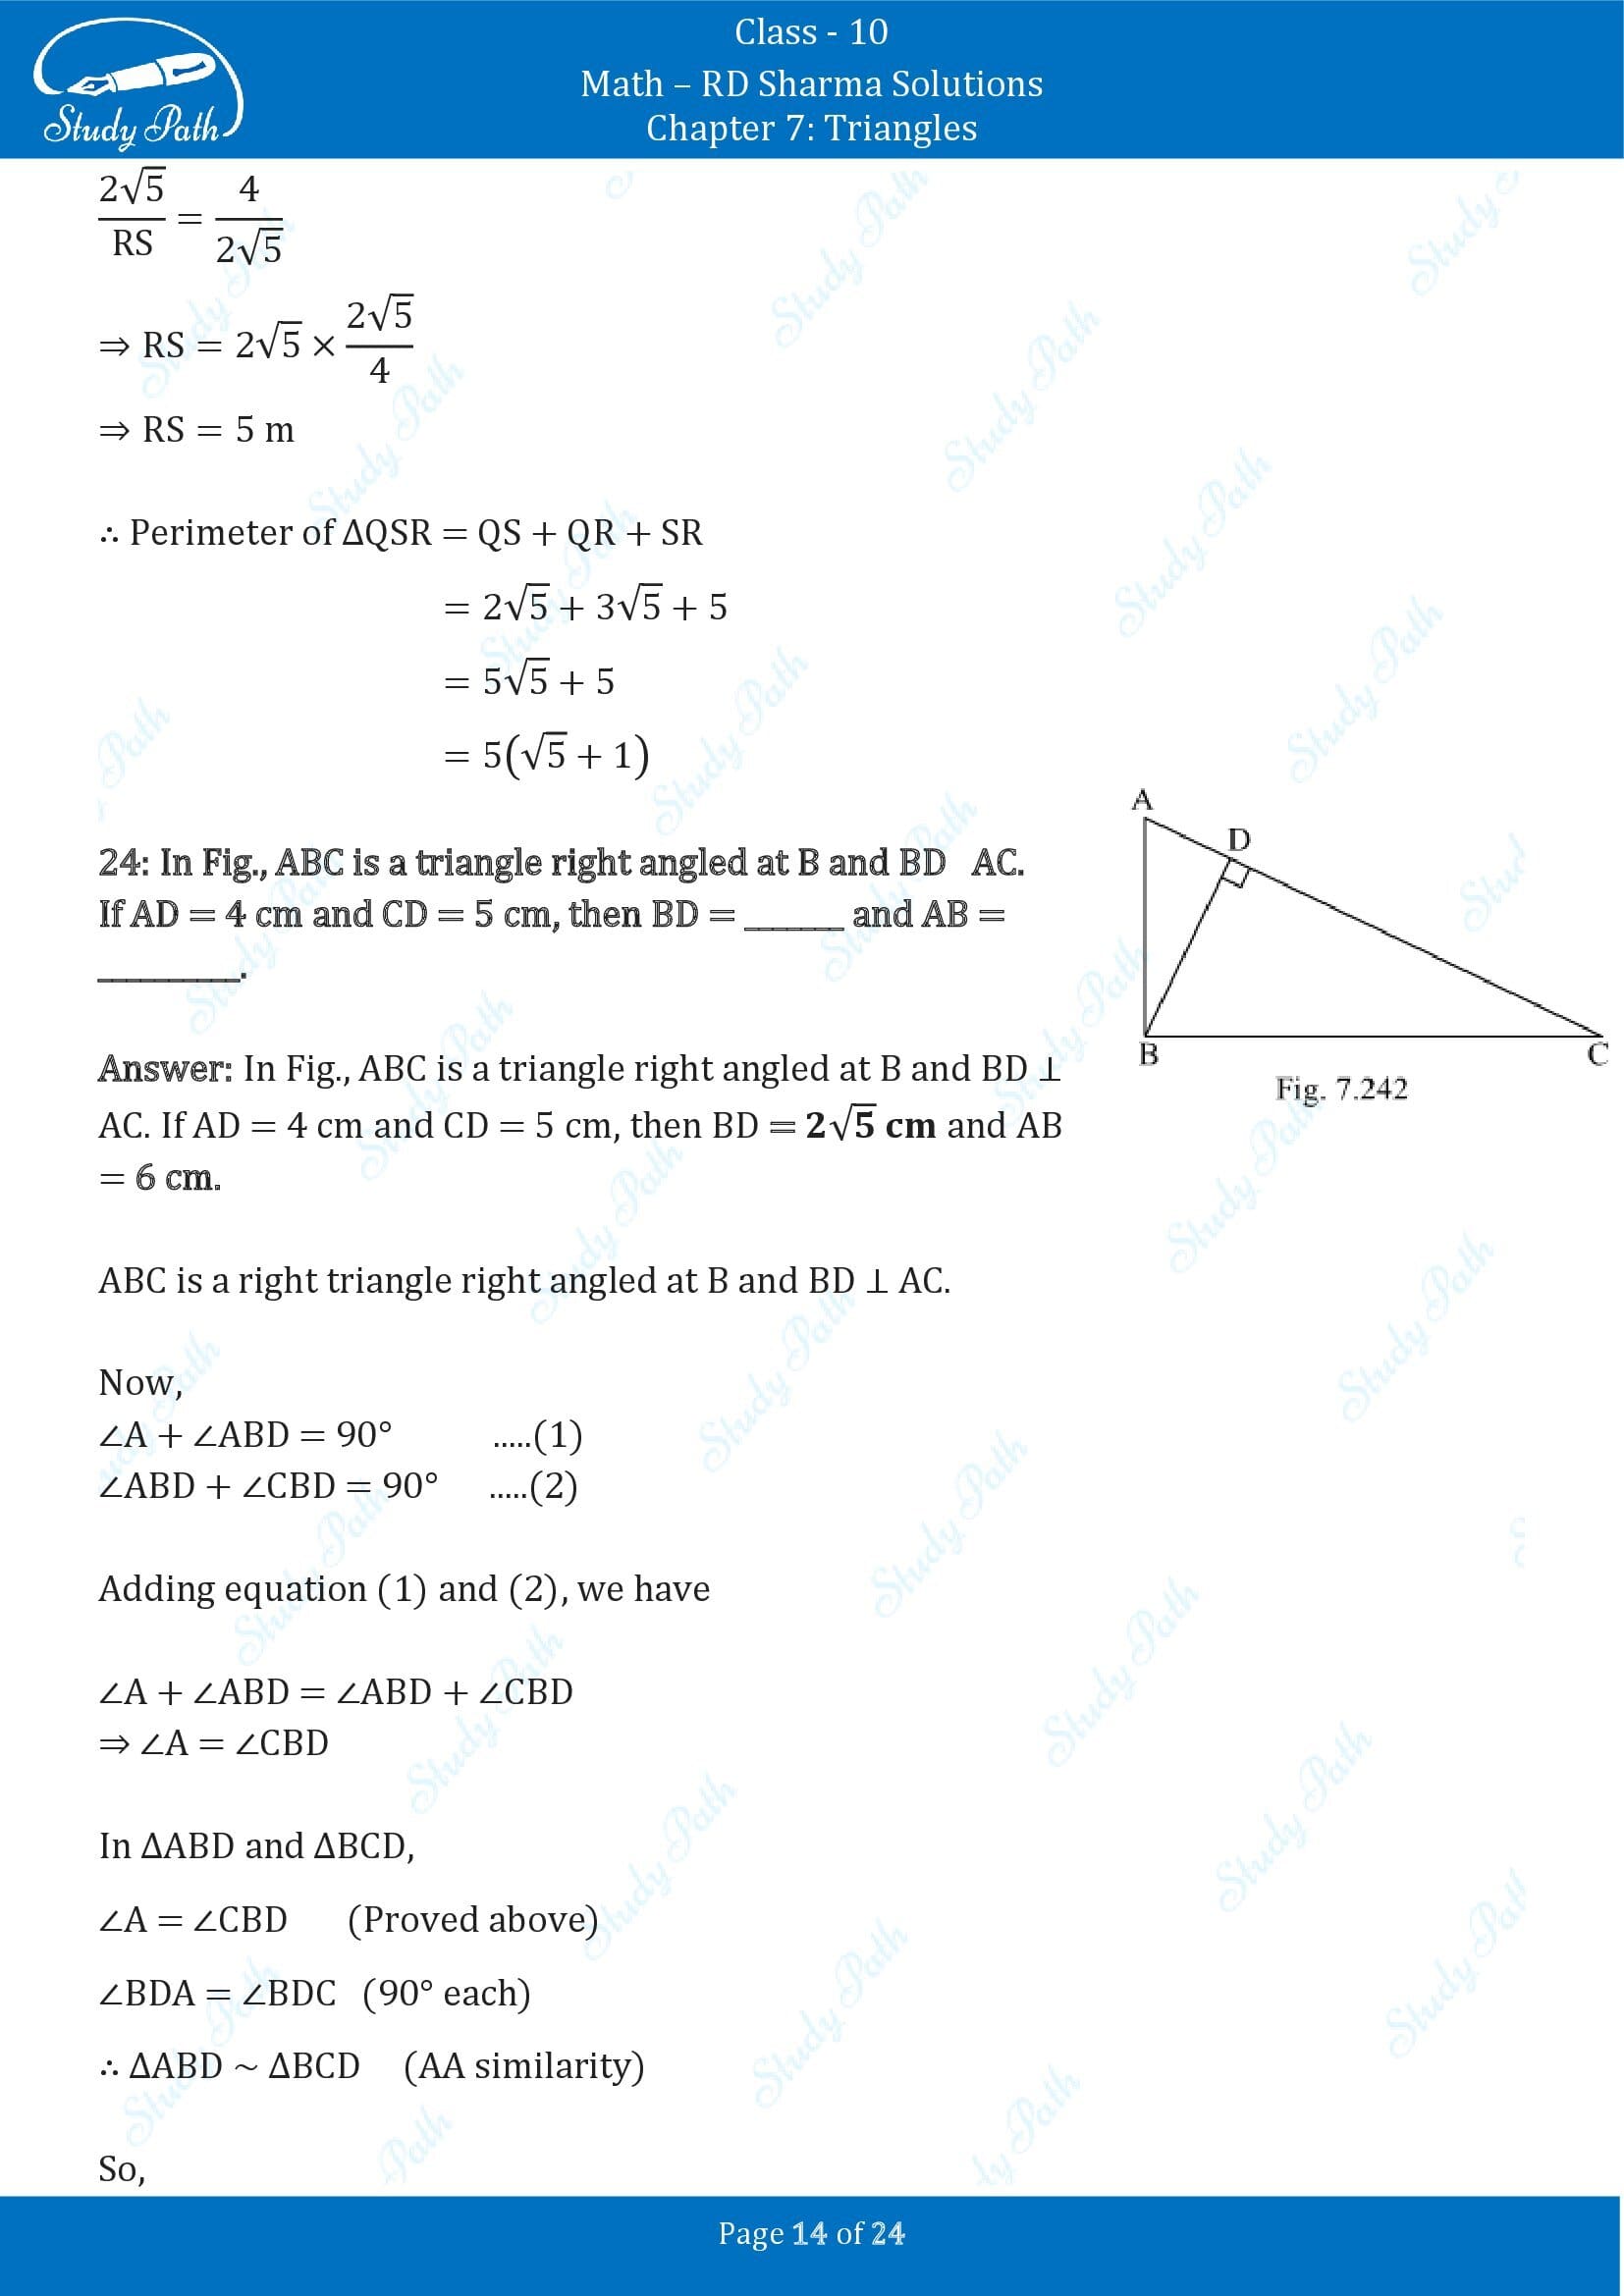 RD Sharma Solutions Class 10 Chapter 7 Triangles Fill in the Blank Type Questions FBQs 00014